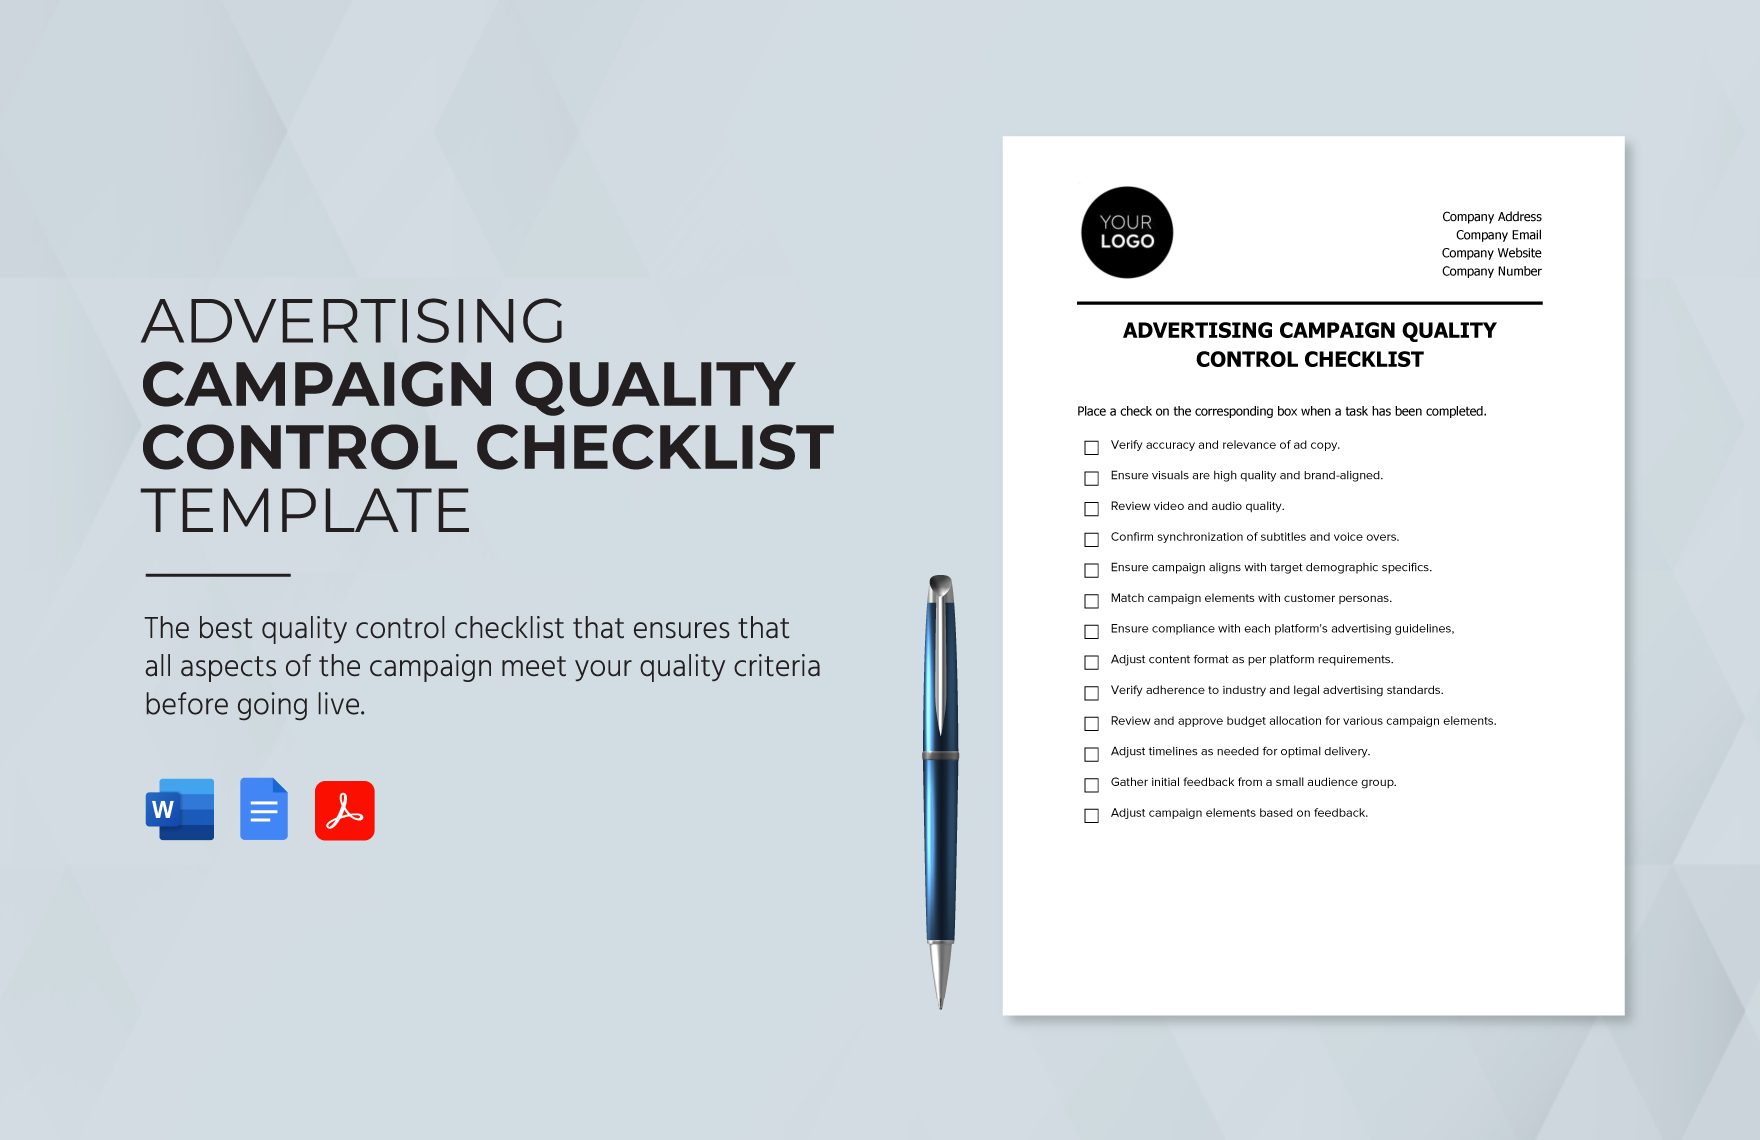 Advertising Campaign Quality Control Checklist Template in Word, Google Docs, PDF